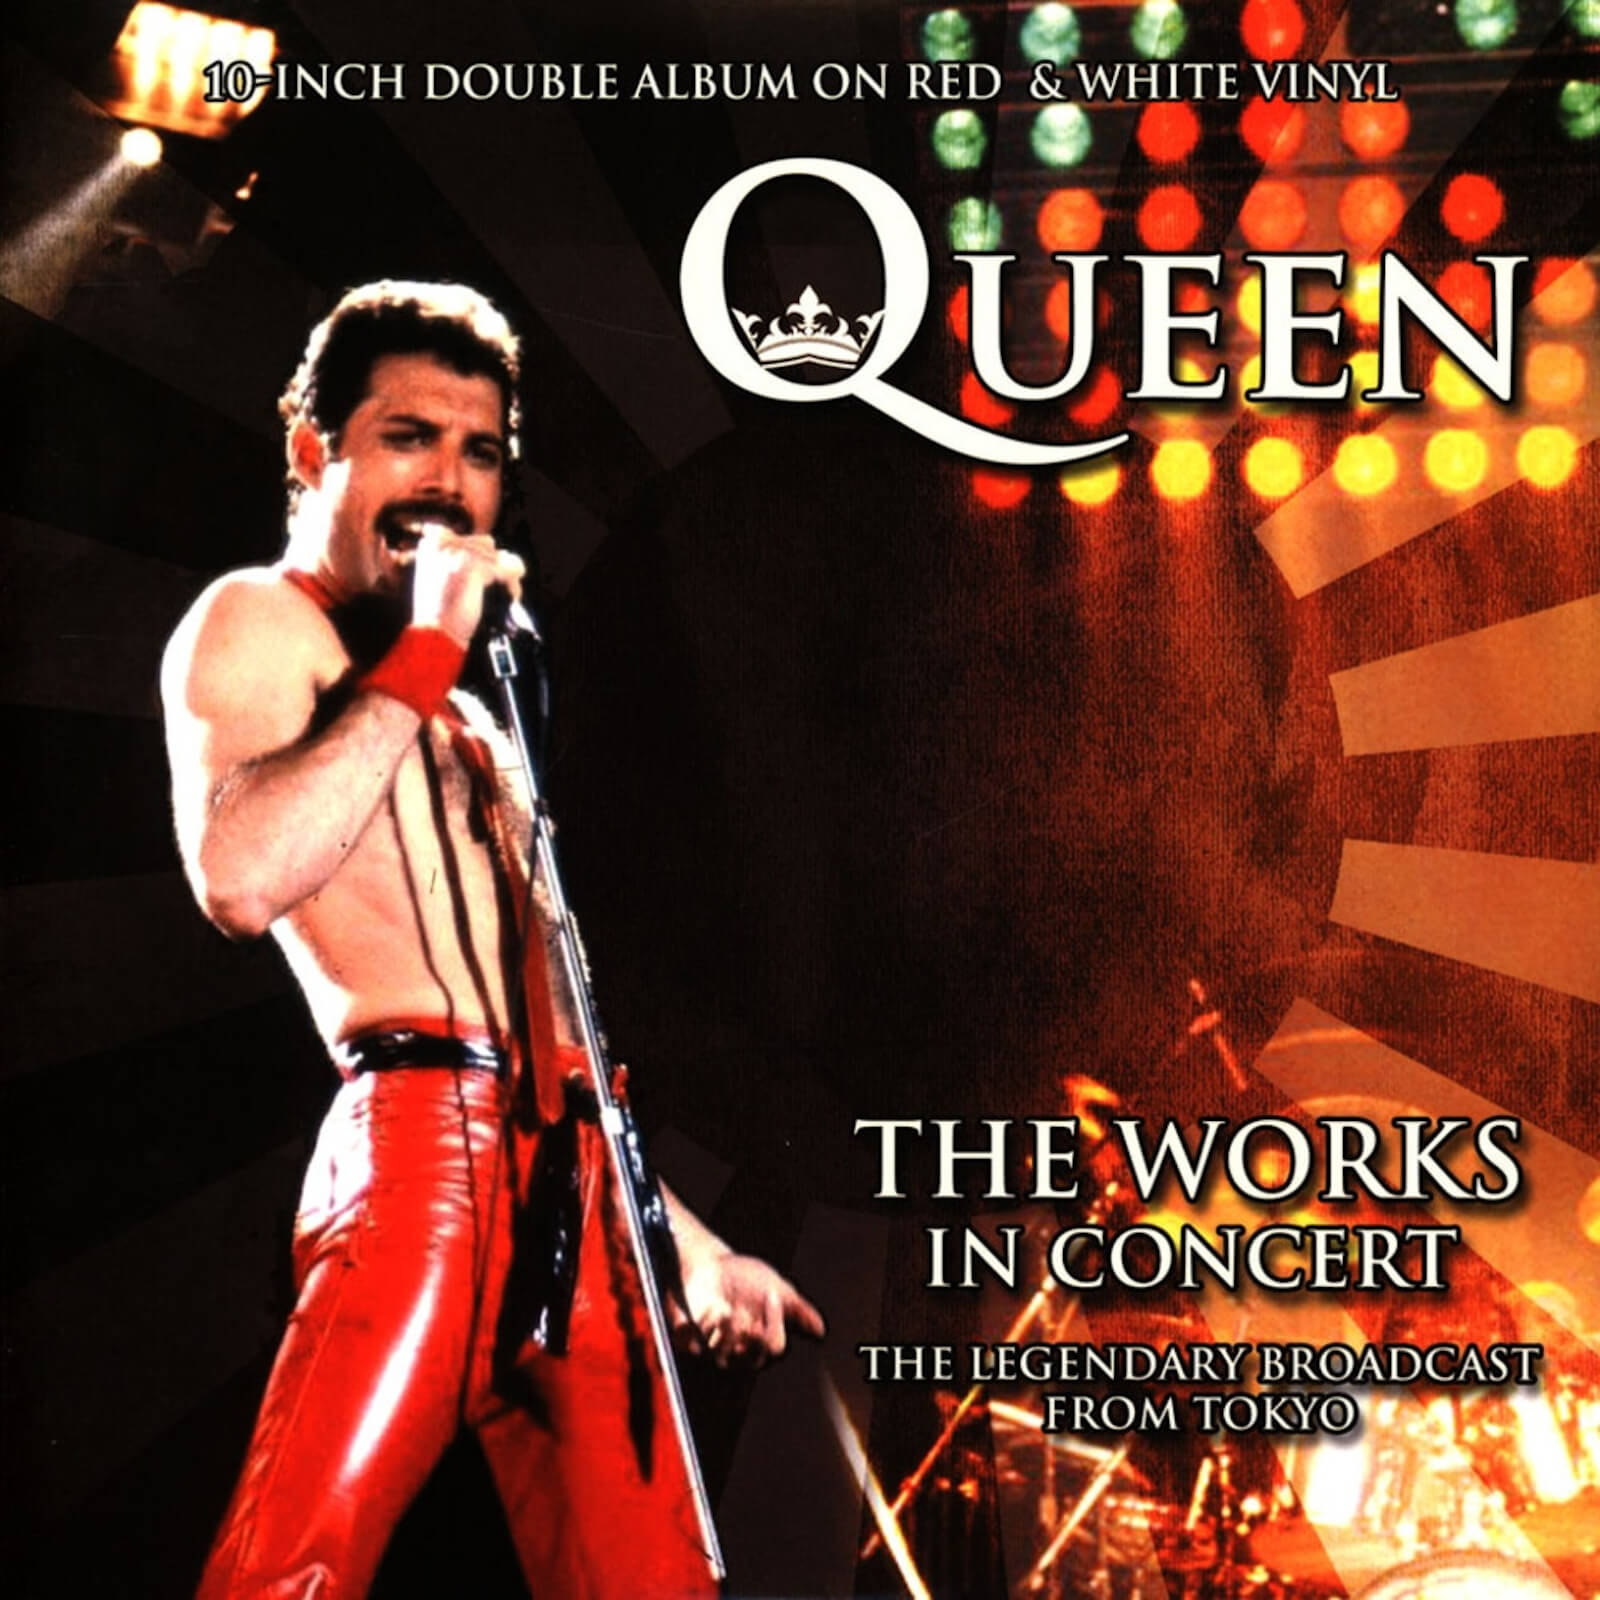 Queen - The Works In Concert (Red & White Vinyl) 2x10